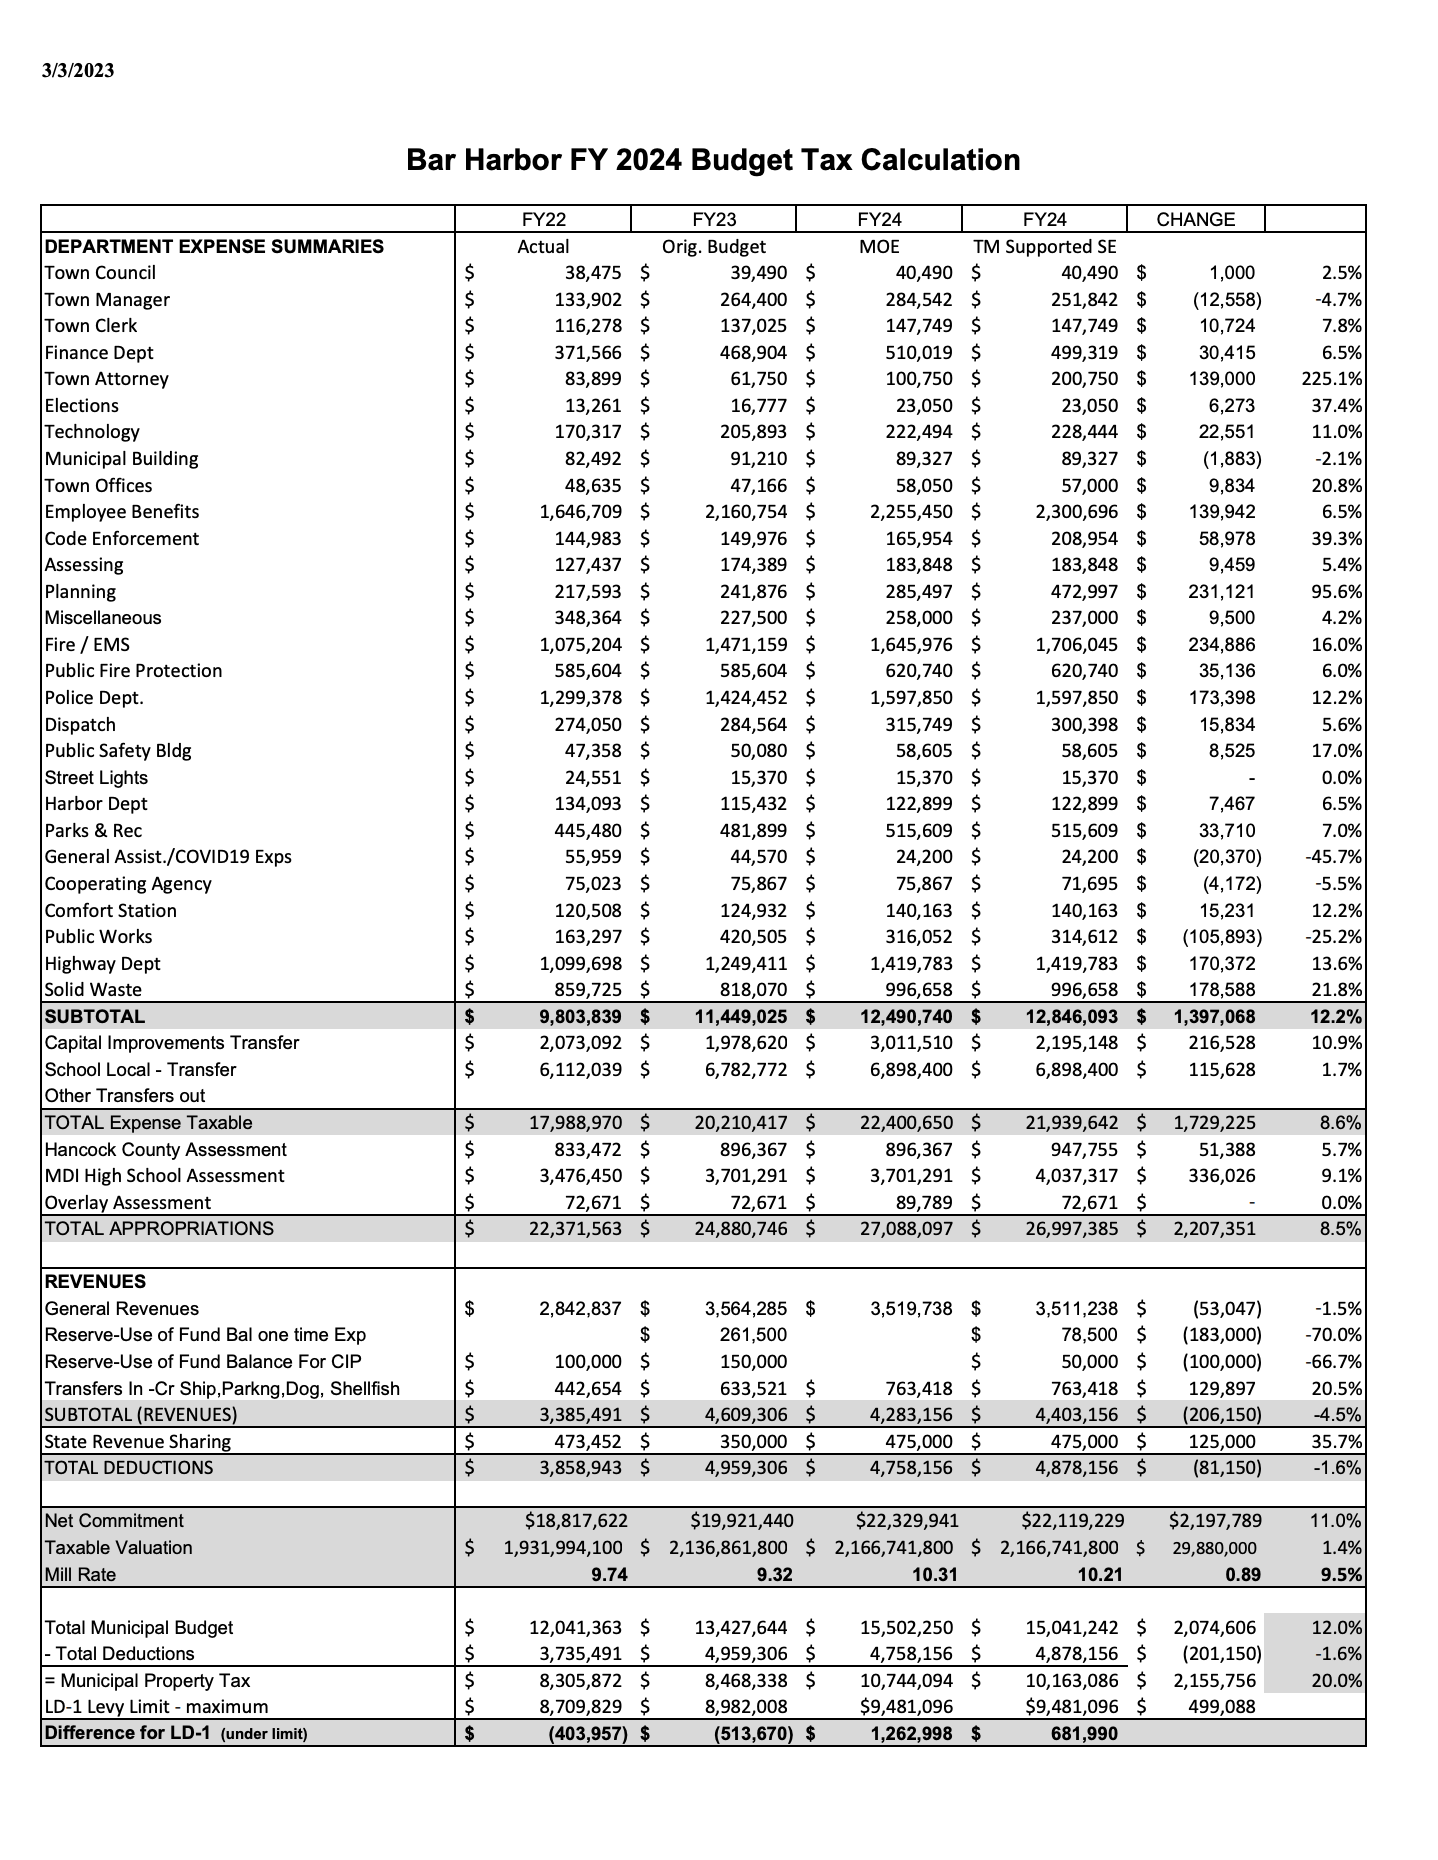 FY 2024 Budget Tentatively Adopted By Council